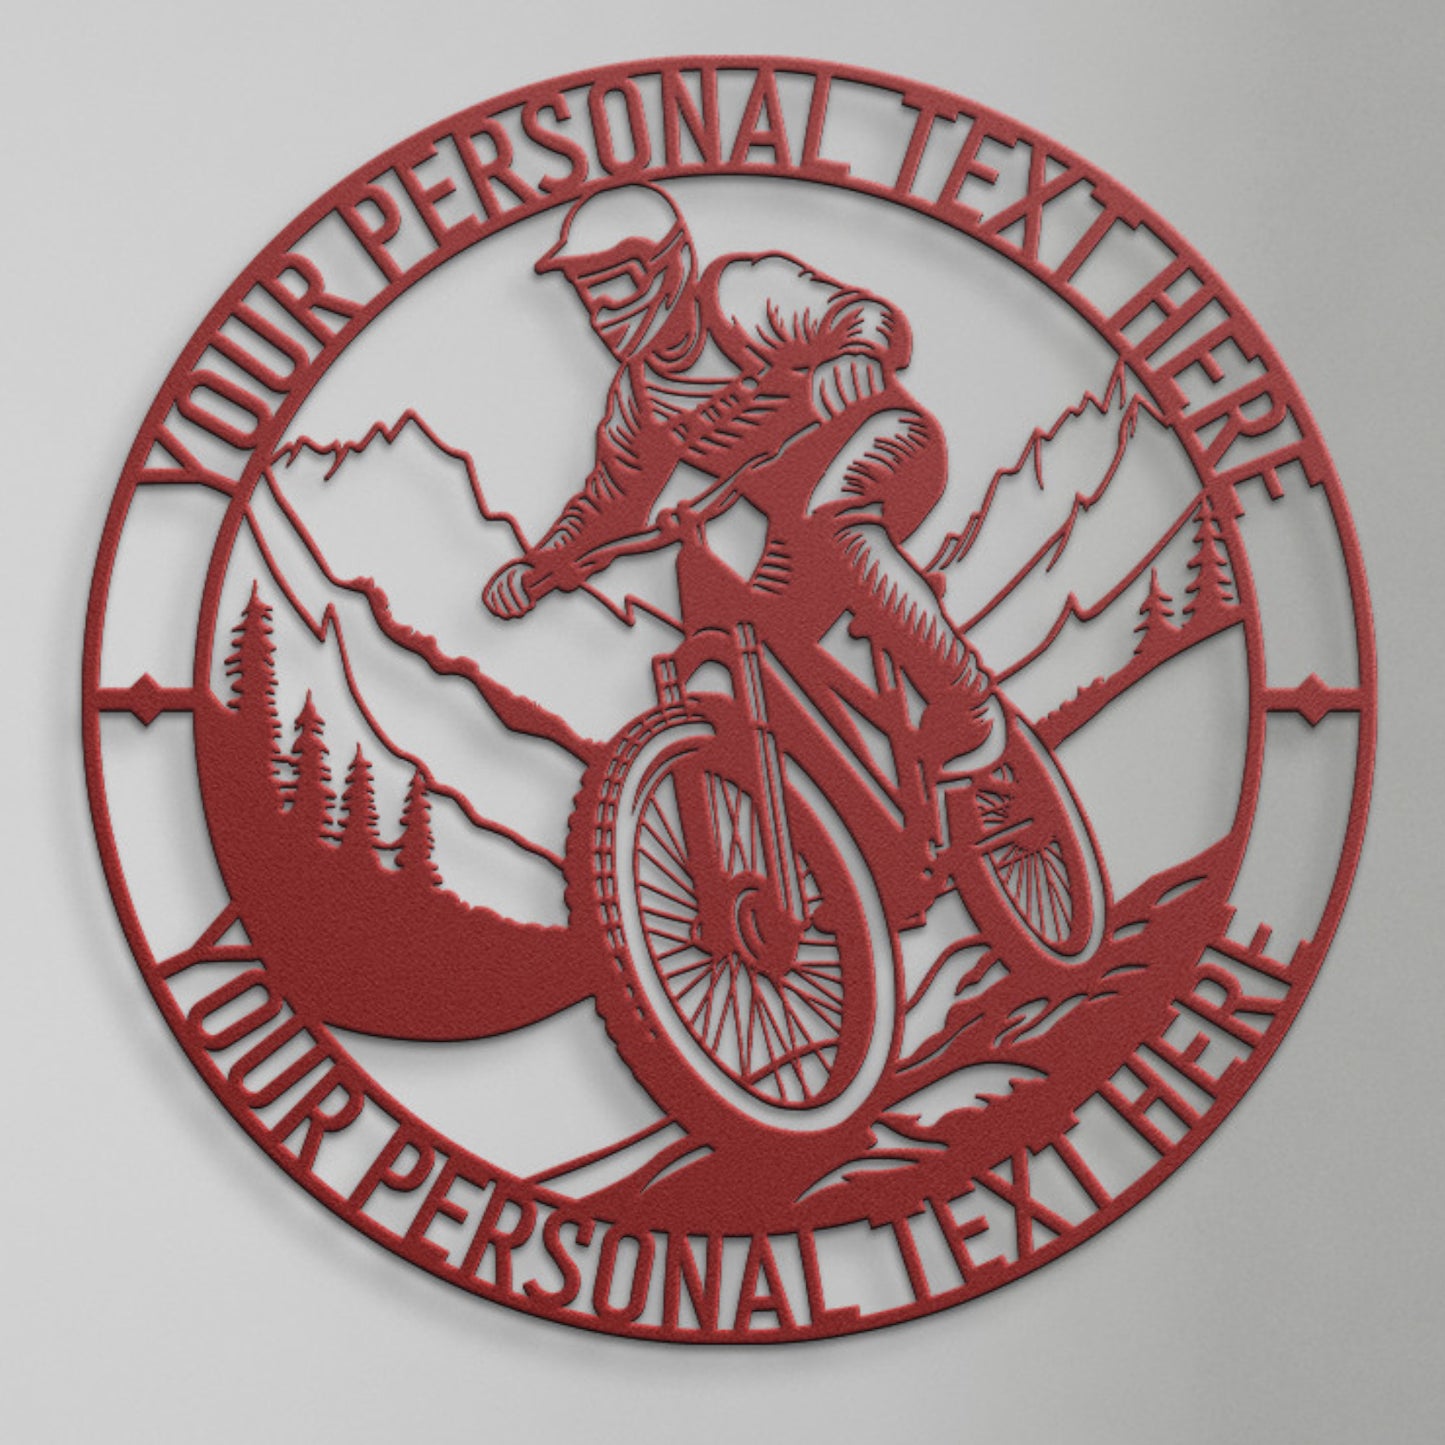 Personalized Off-Road Cycling Metal Sign. Custom Trail Riding Wall Decor Gift. Trail Biker Decor. Clubhouse Wall Hanging. Xtreme Cyclist. 